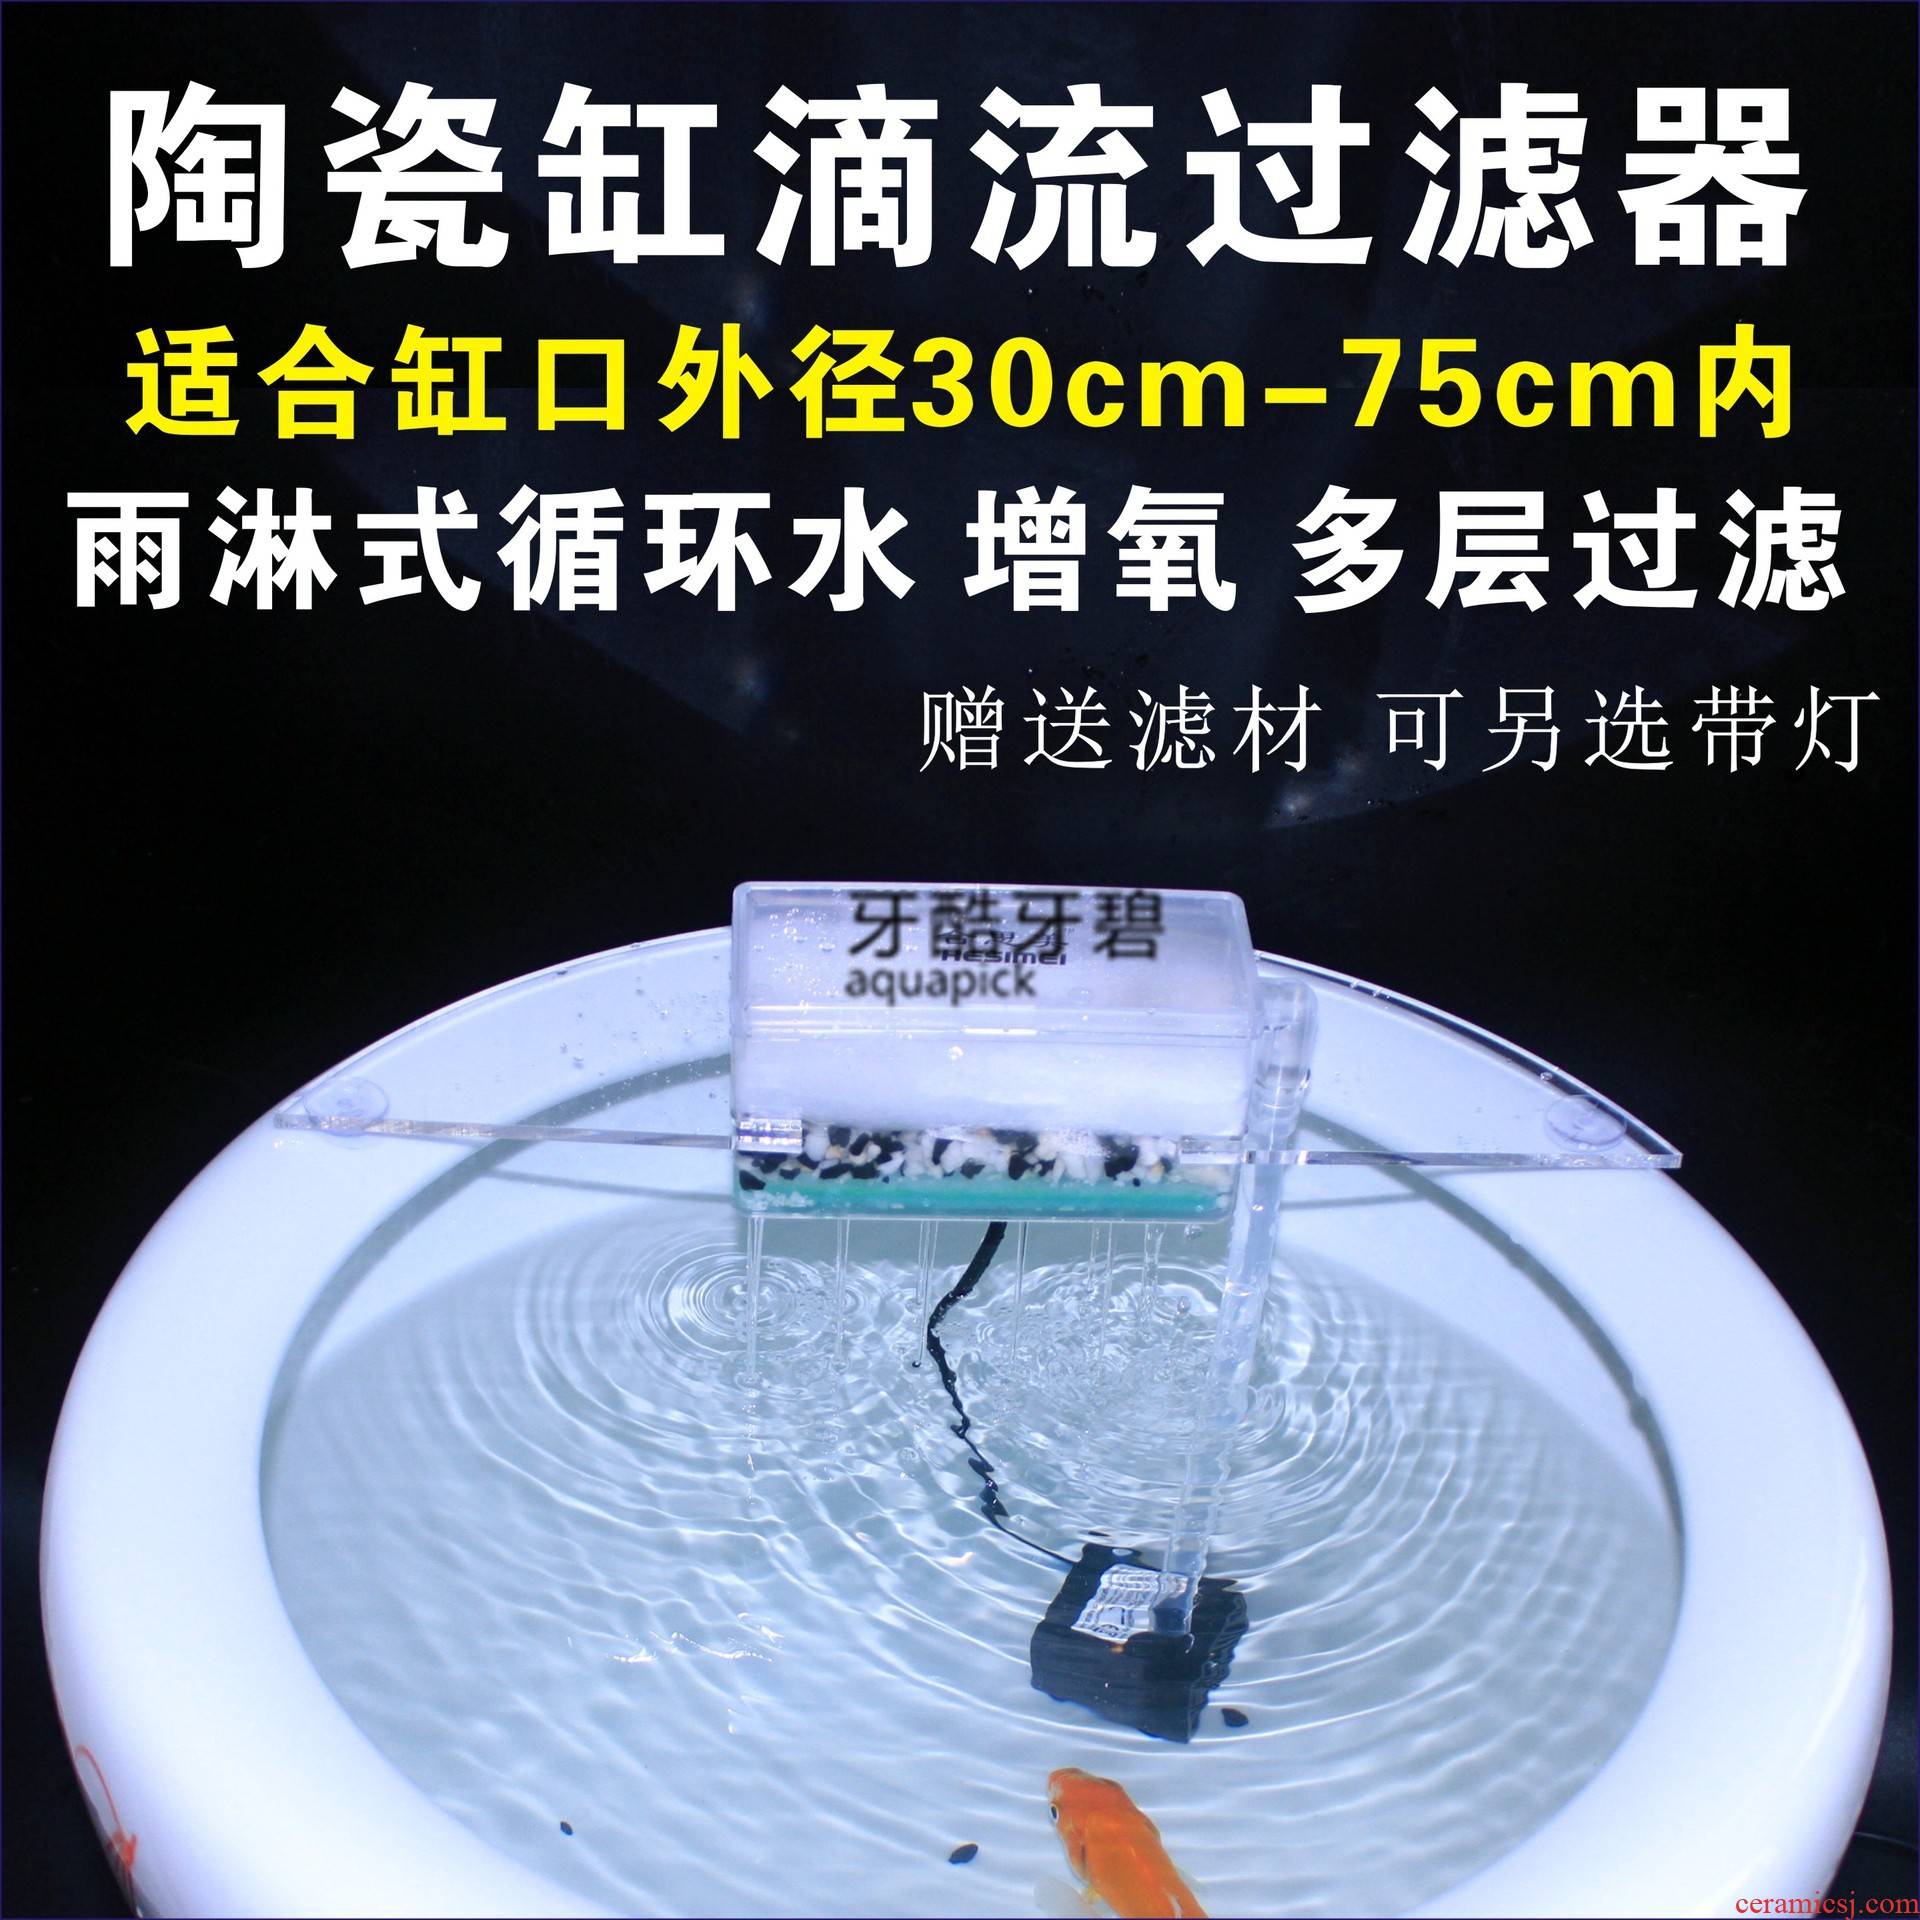 Ceramic aquarium filter circular cylinder - oxygen absorption and the filter box to breed fish in the circulating water purification filter pumps